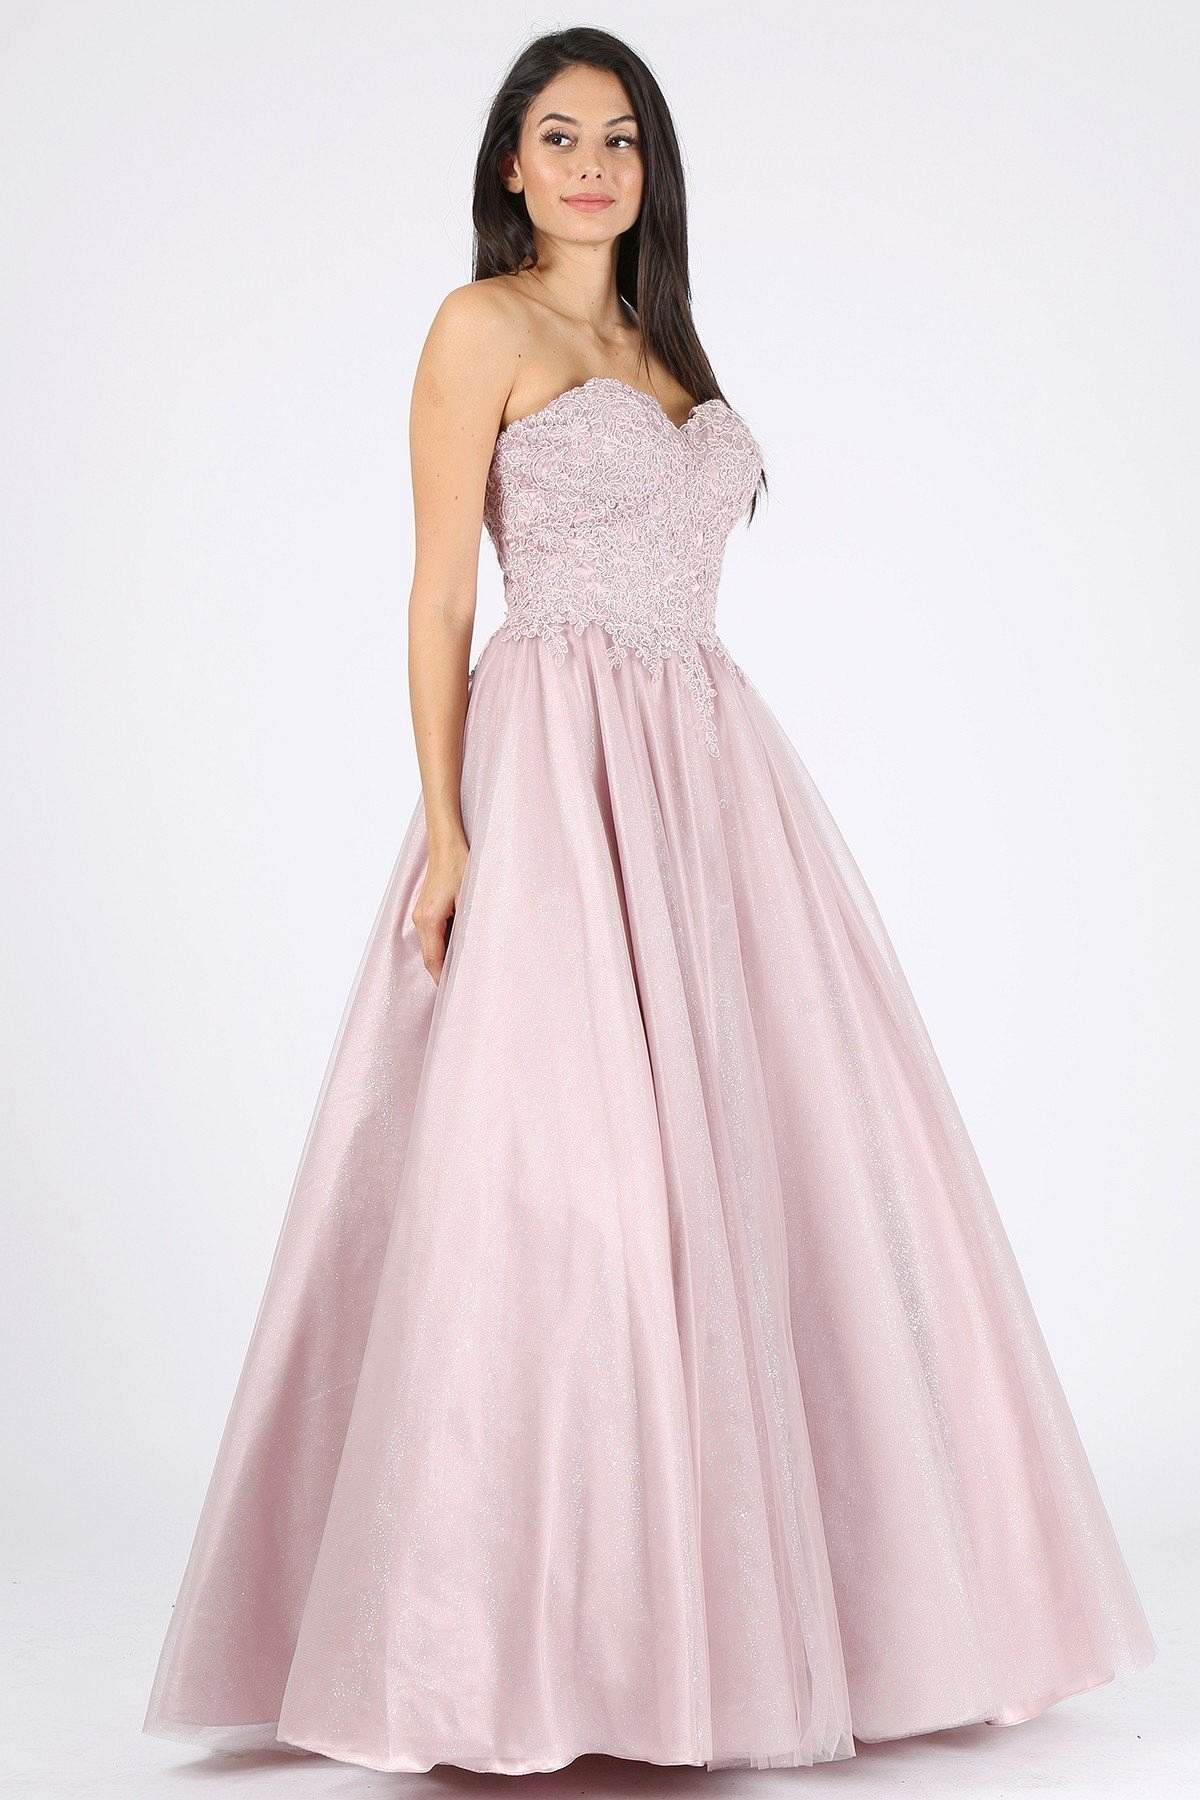 Victorian Lilac Prom Ball Gown Strapless